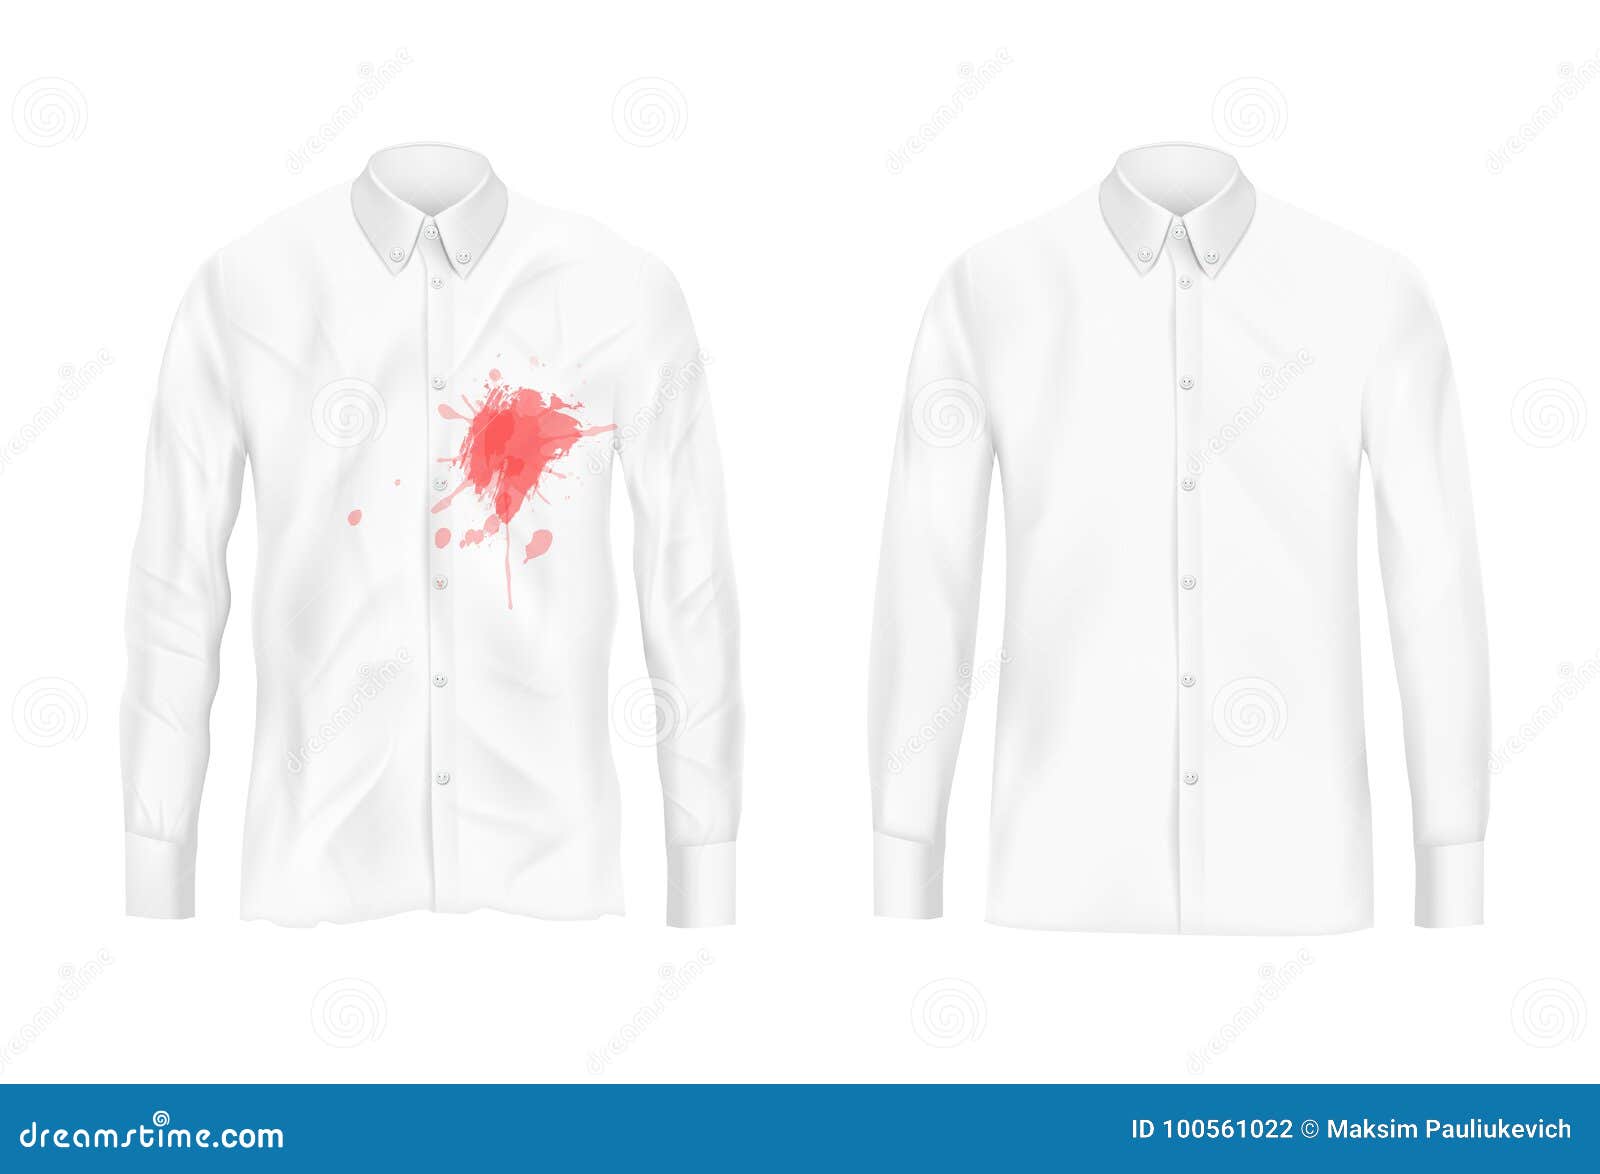 Shirt Stain Remover Experiment Vector Concept Stock Vector ...